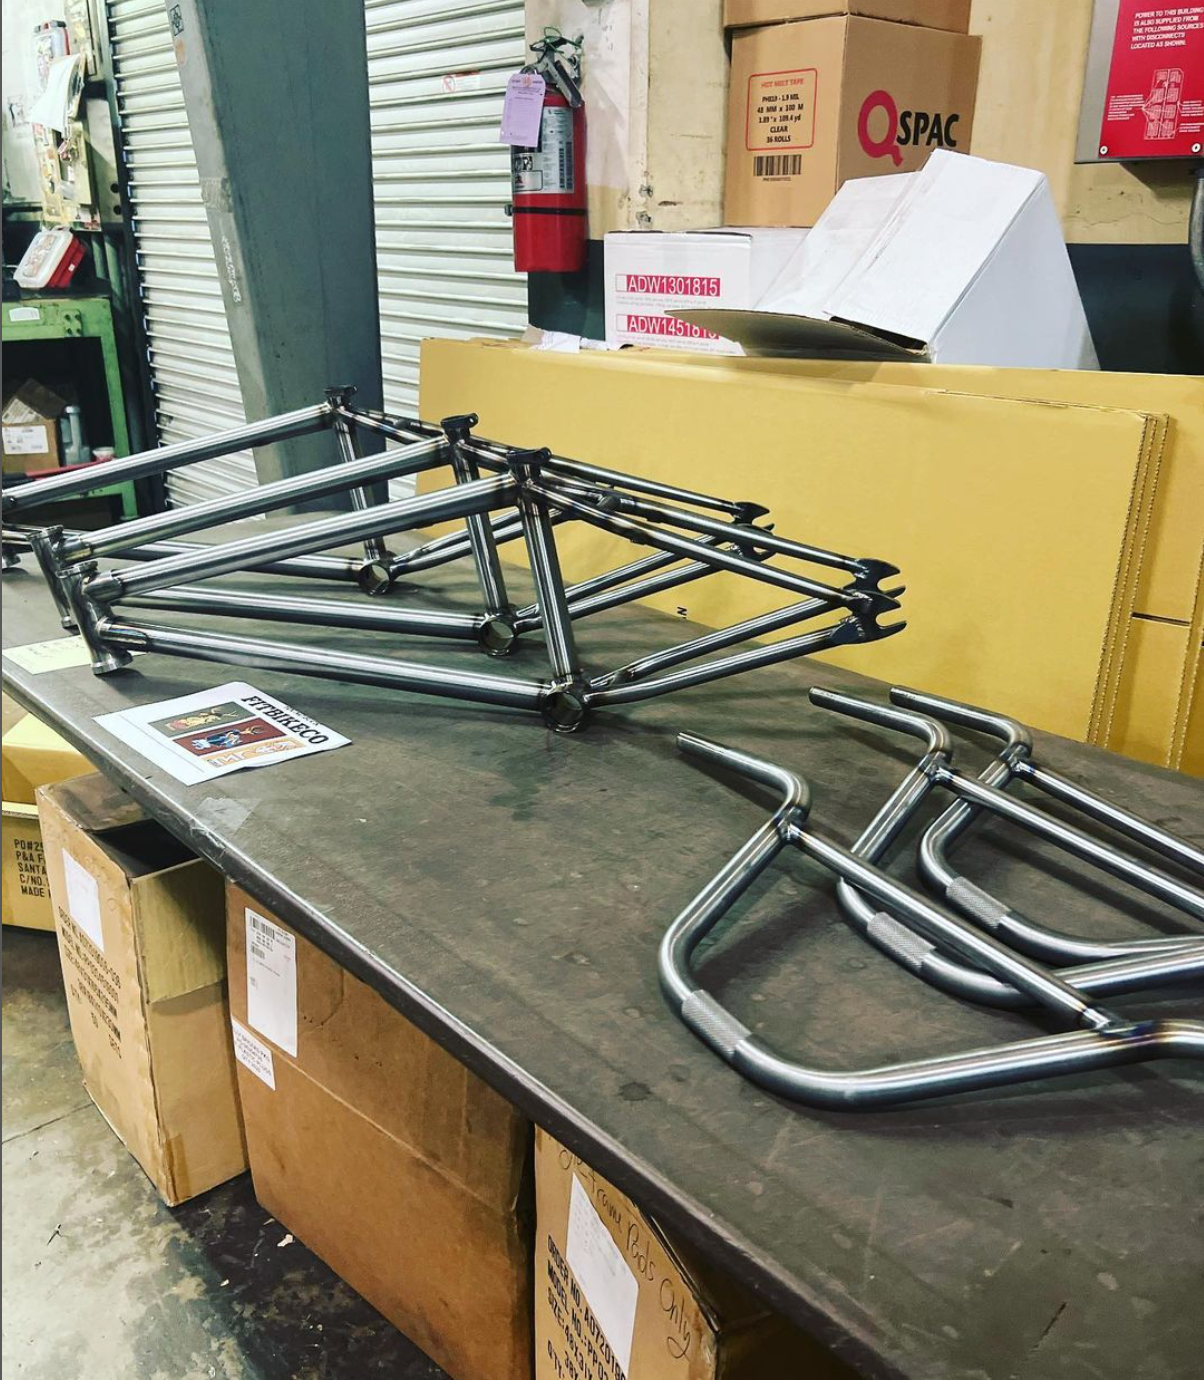 New frames & Bars - Guess who's | Fitbikeco